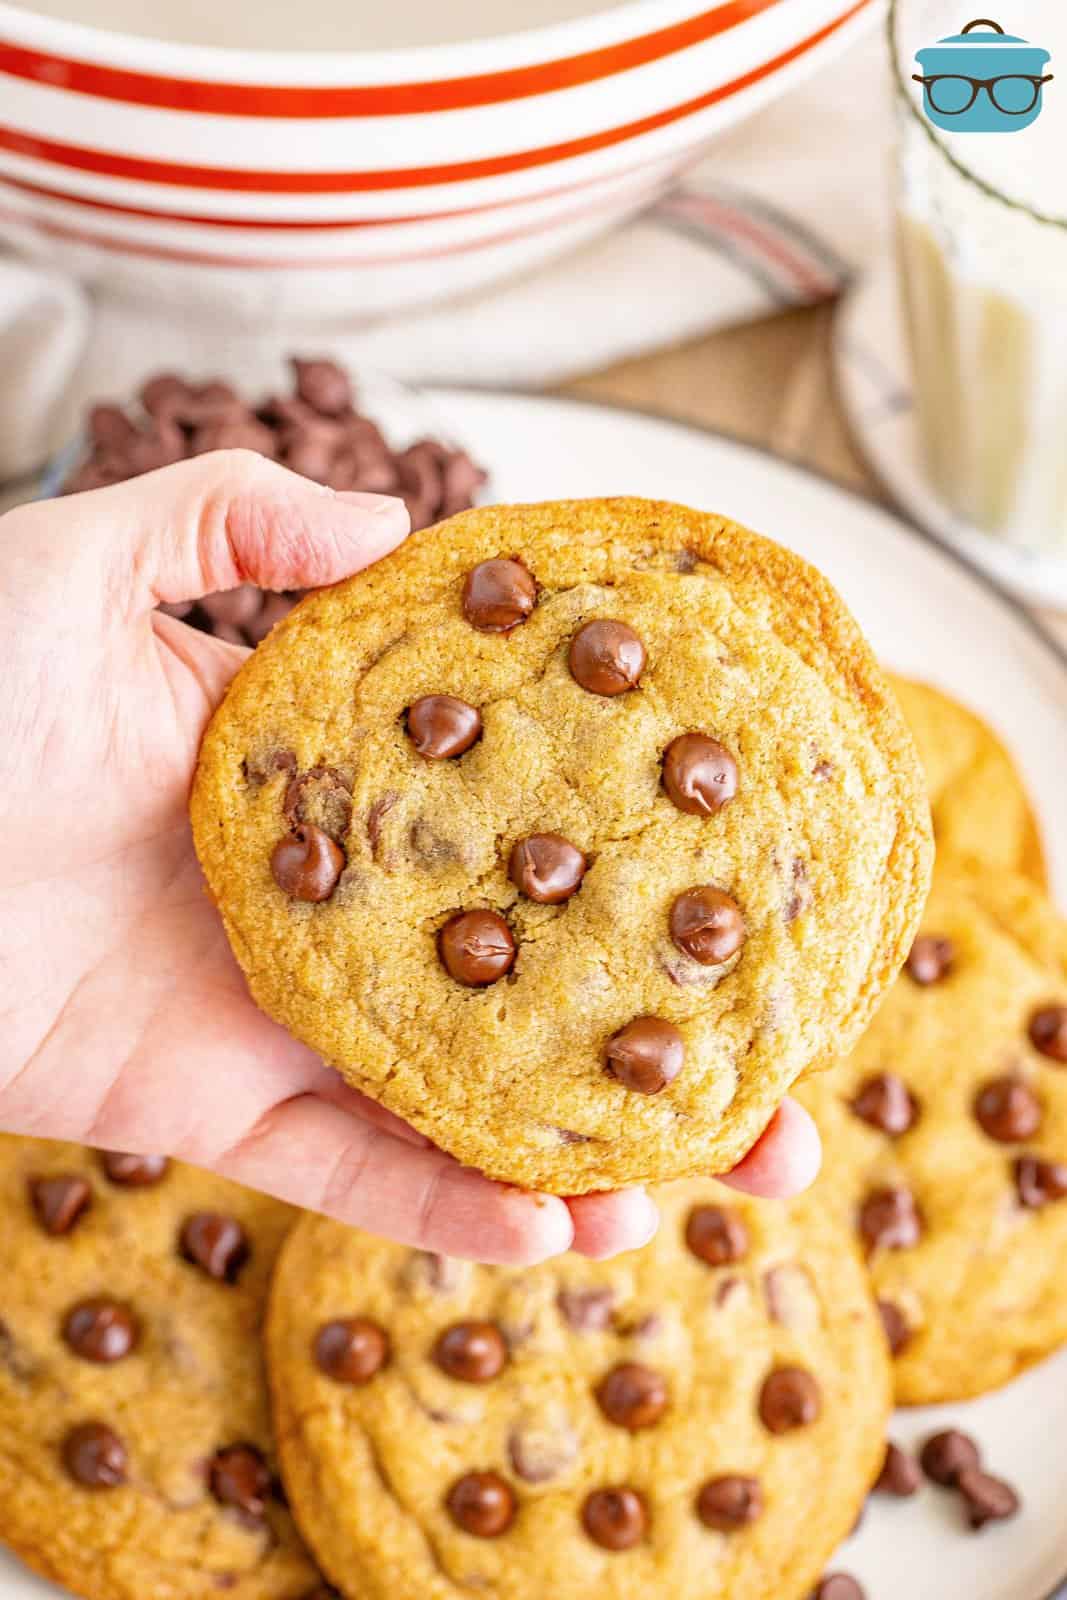 A hand holding a copycat Mrs. Fields Chocolate Chip Cookie above a plate of them.